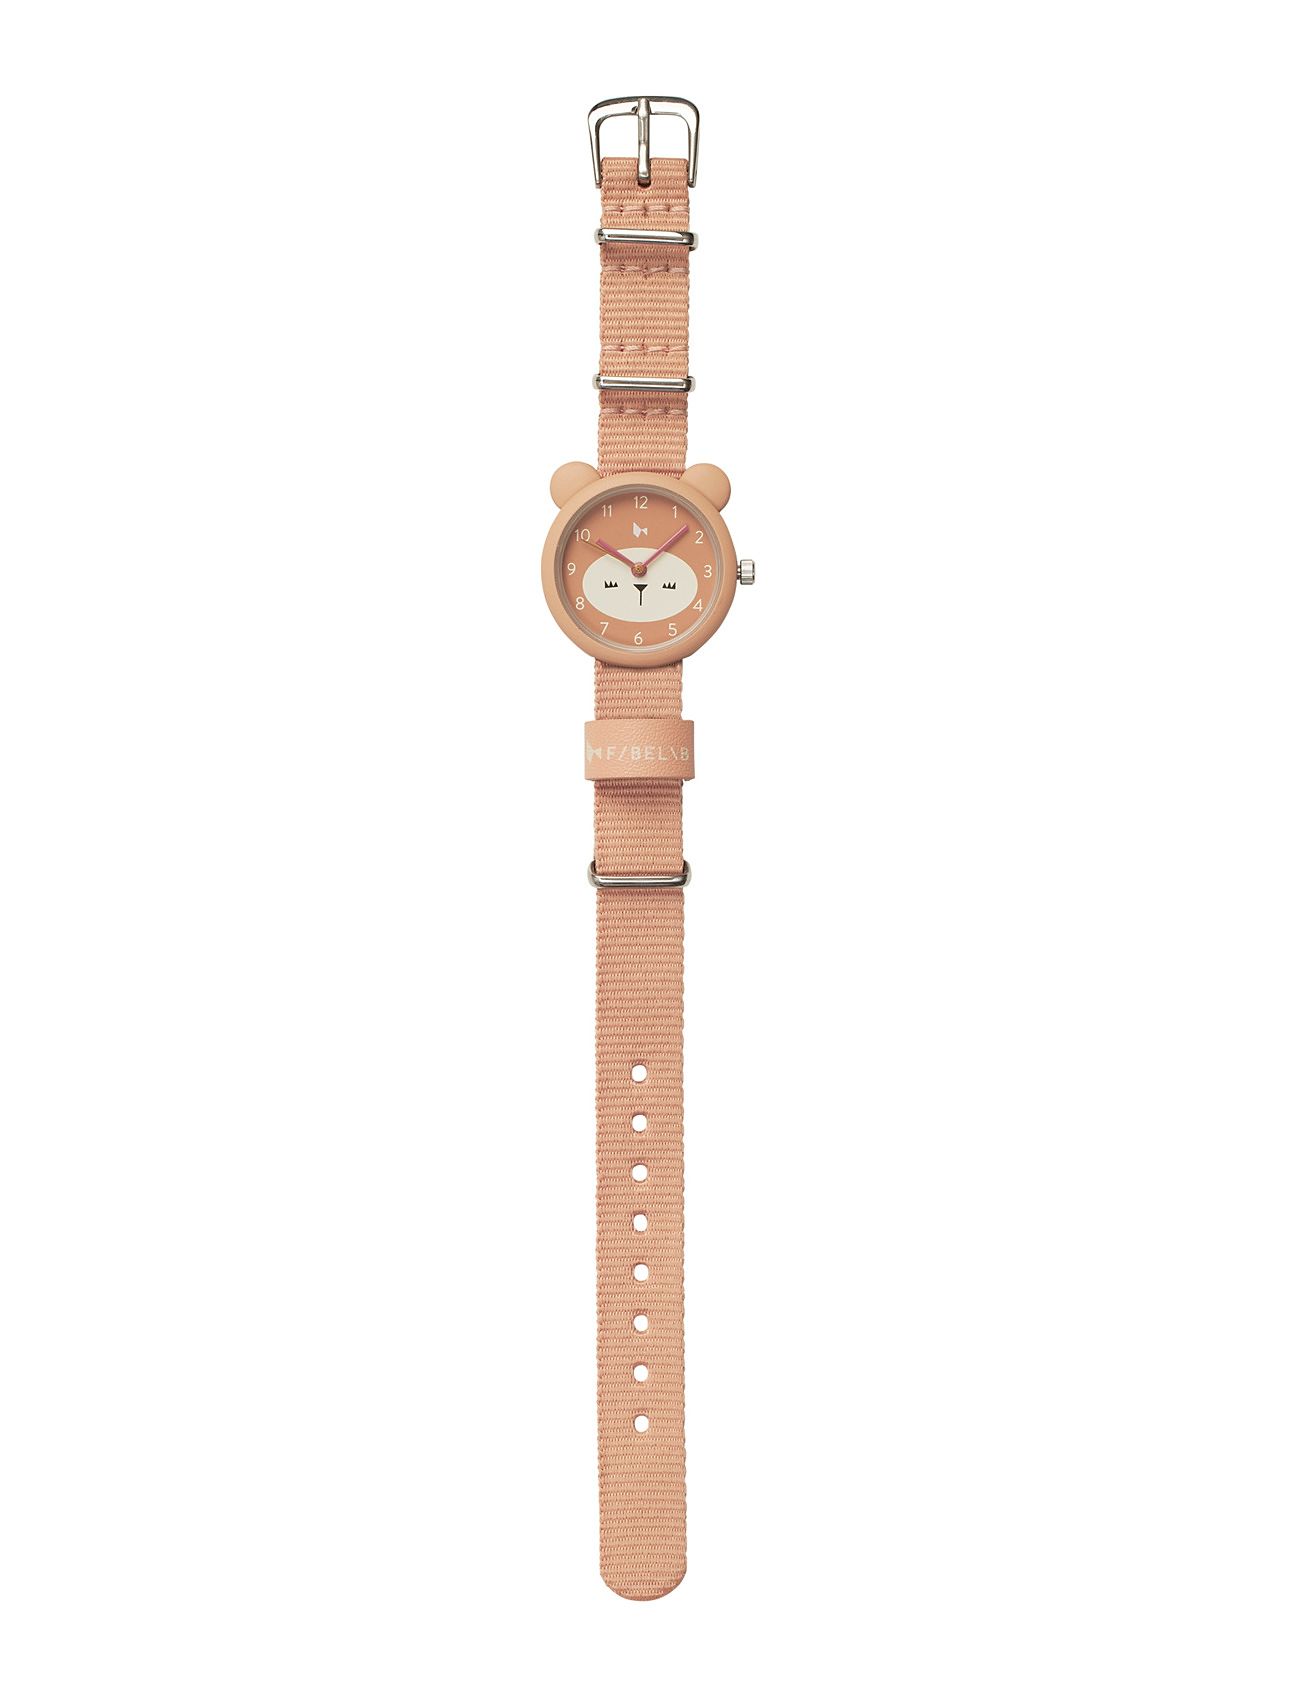 Kids Watch - Bear - Old Rose Accessories Watches Analog Watches Pink Fabelab